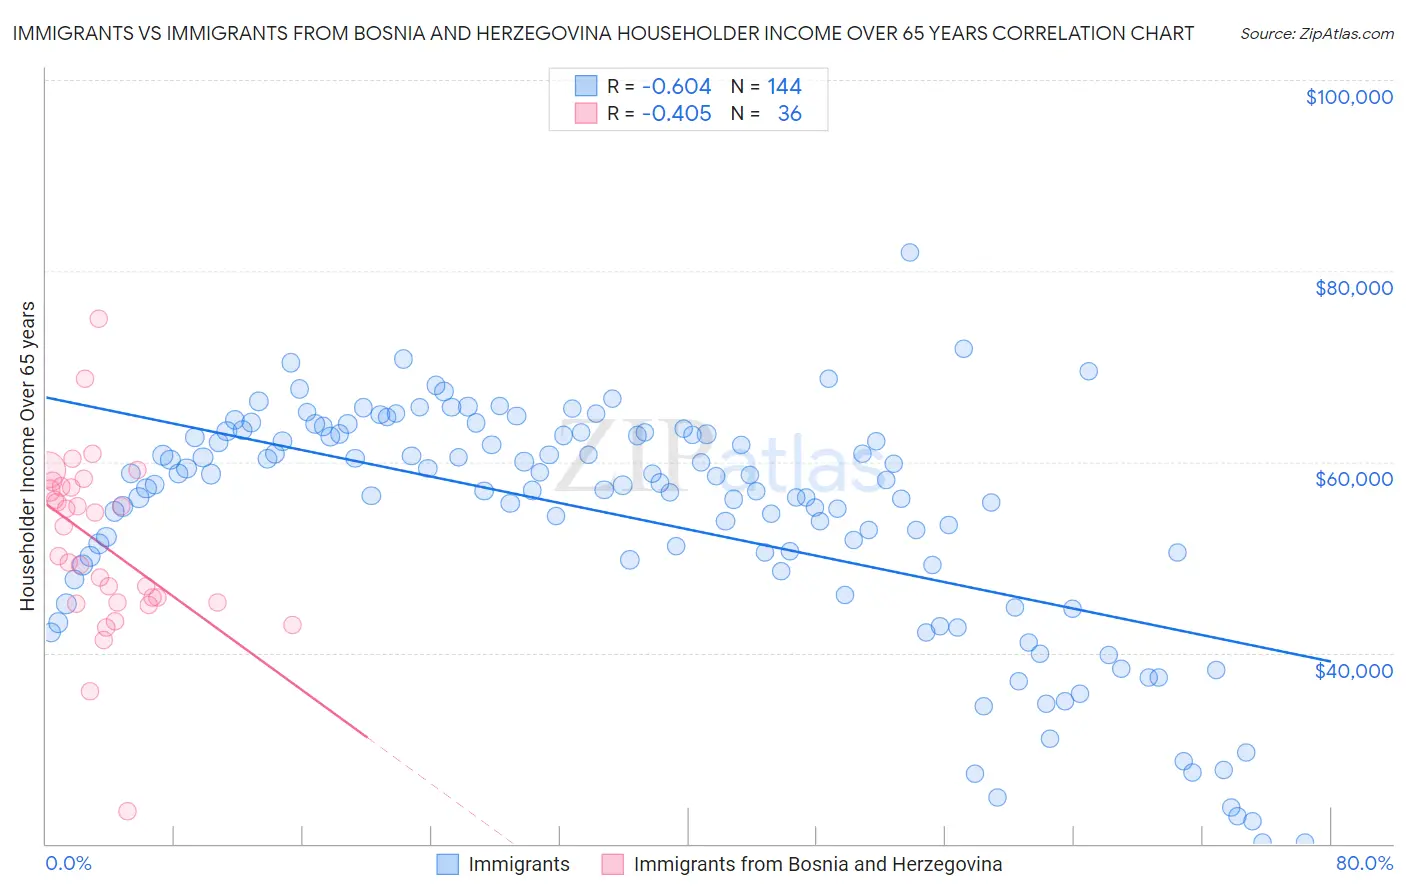 Immigrants vs Immigrants from Bosnia and Herzegovina Householder Income Over 65 years